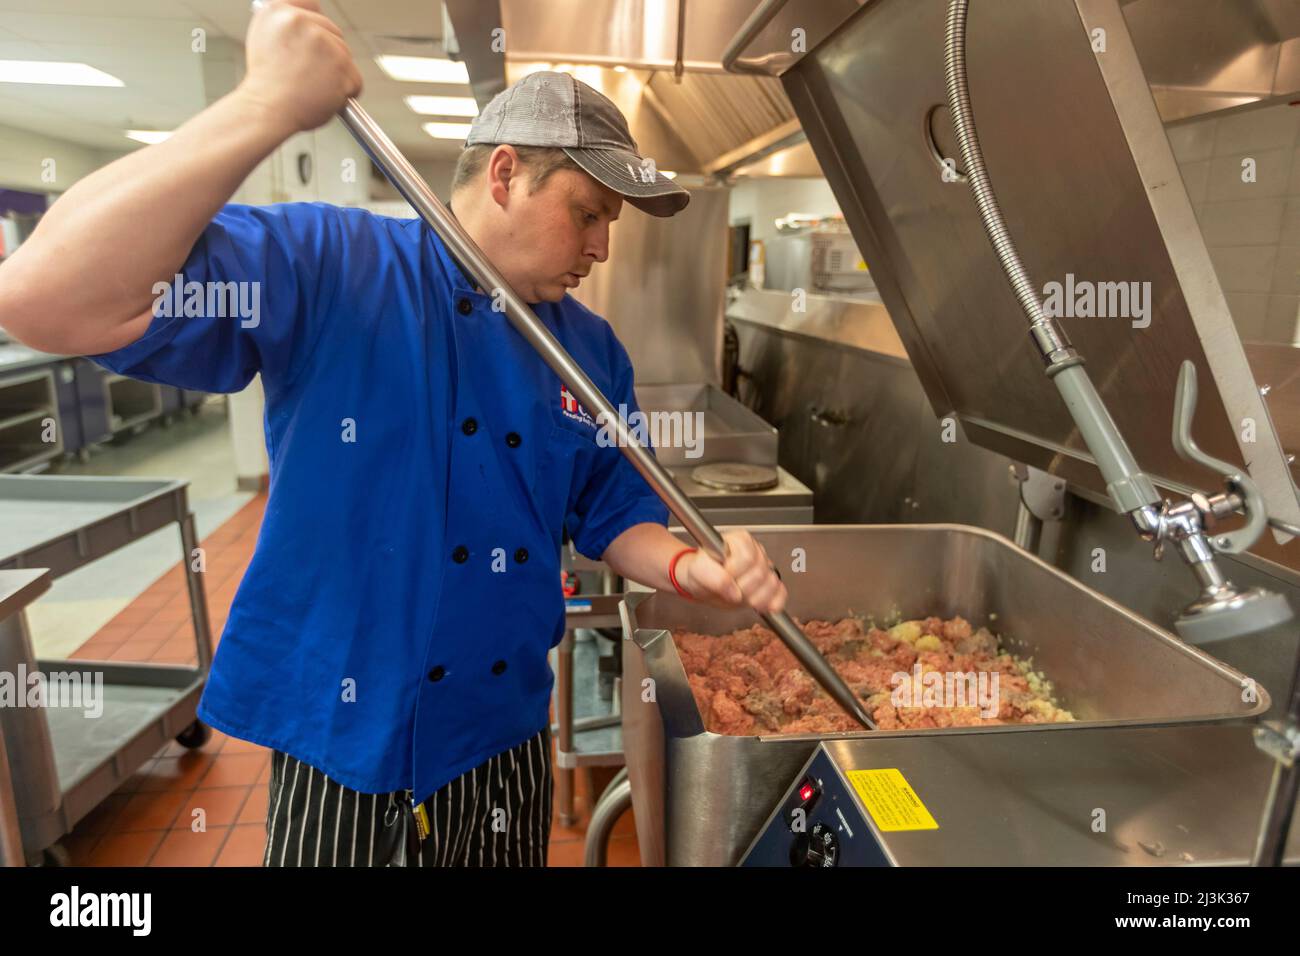 Paducah, Kentucky - Mercy Chefs prepares meals for volunteers working to repair damage from the December 2021 tornado that devasted towns in western K Stock Photo